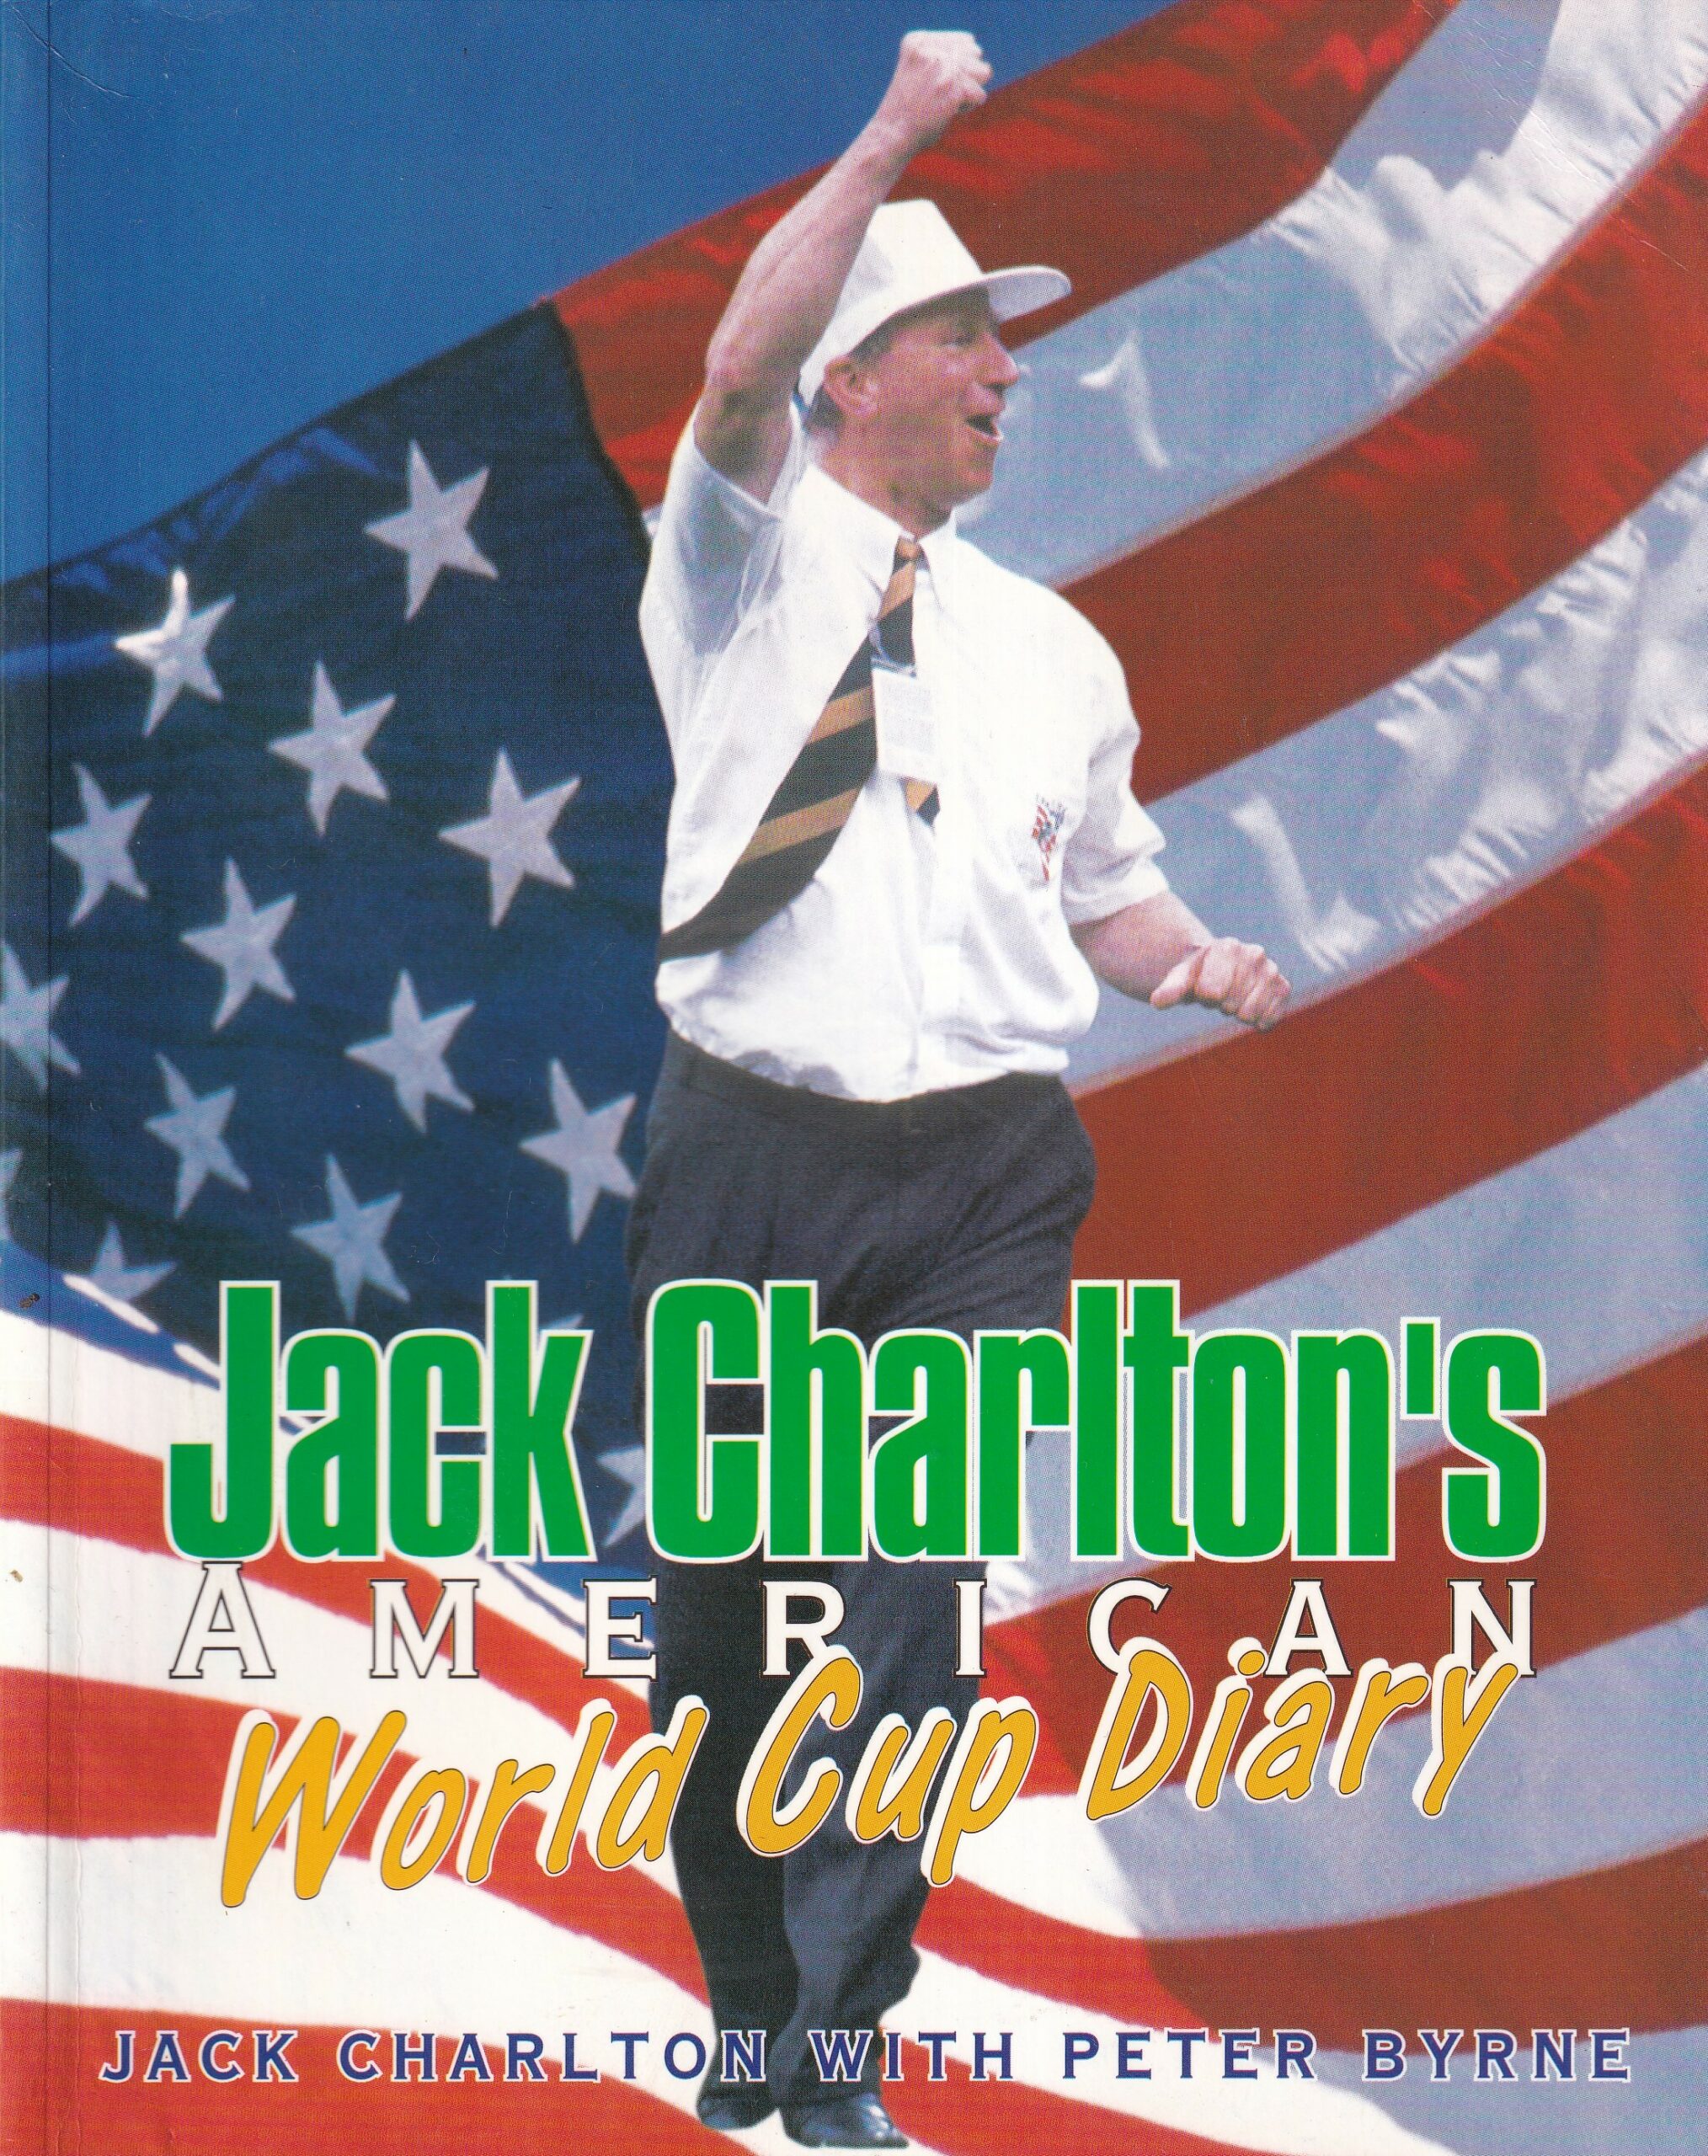 Jack Charlton’s American World Cup Diary | Jack Charlton and Peter Byrne | Charlie Byrne's